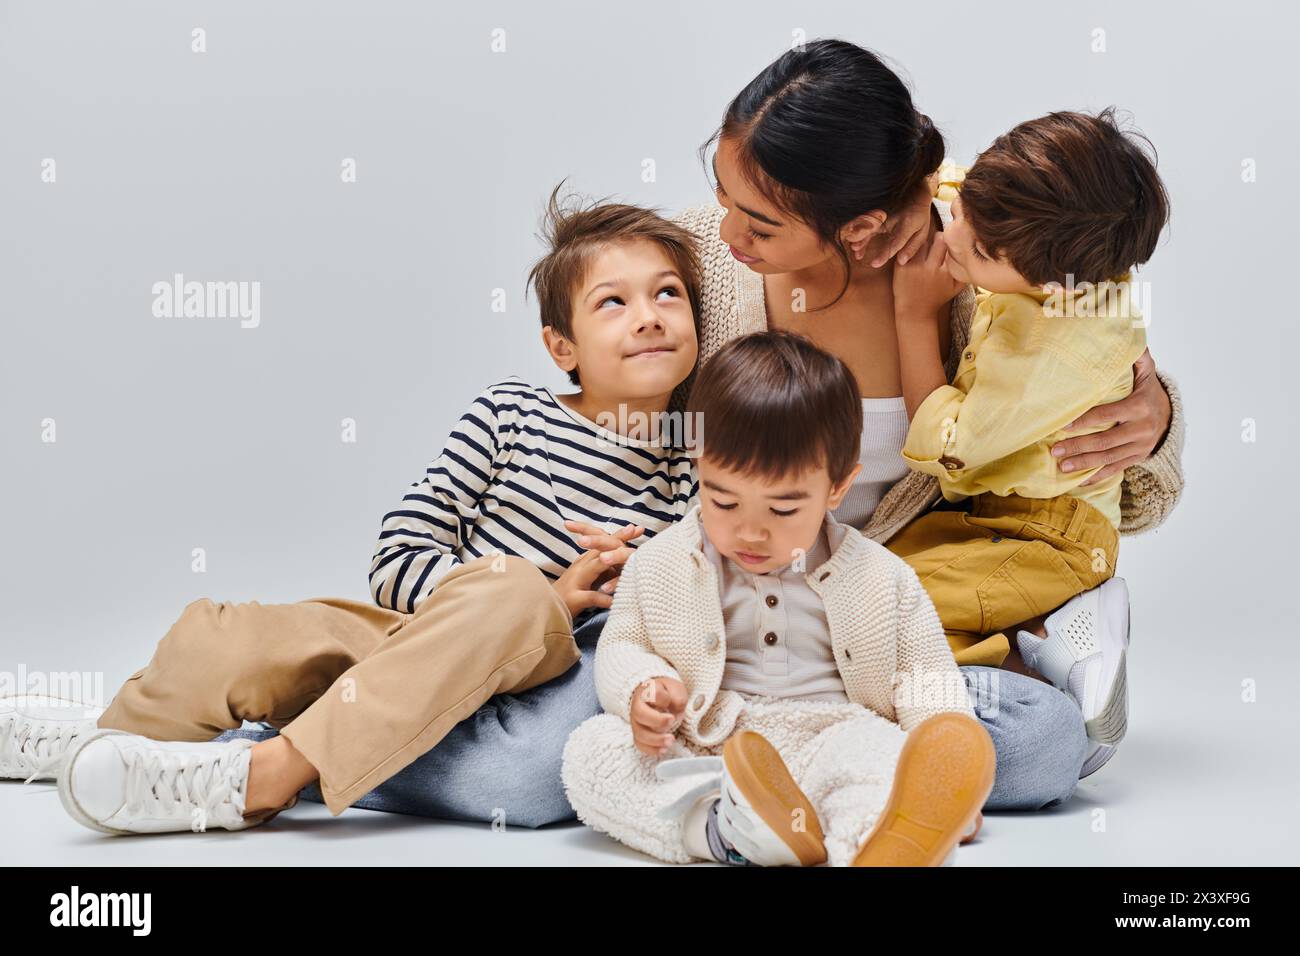 An Asian mother sits on the floor with her children, sharing a loving embrace in a studio against a grey background. Stock Photo